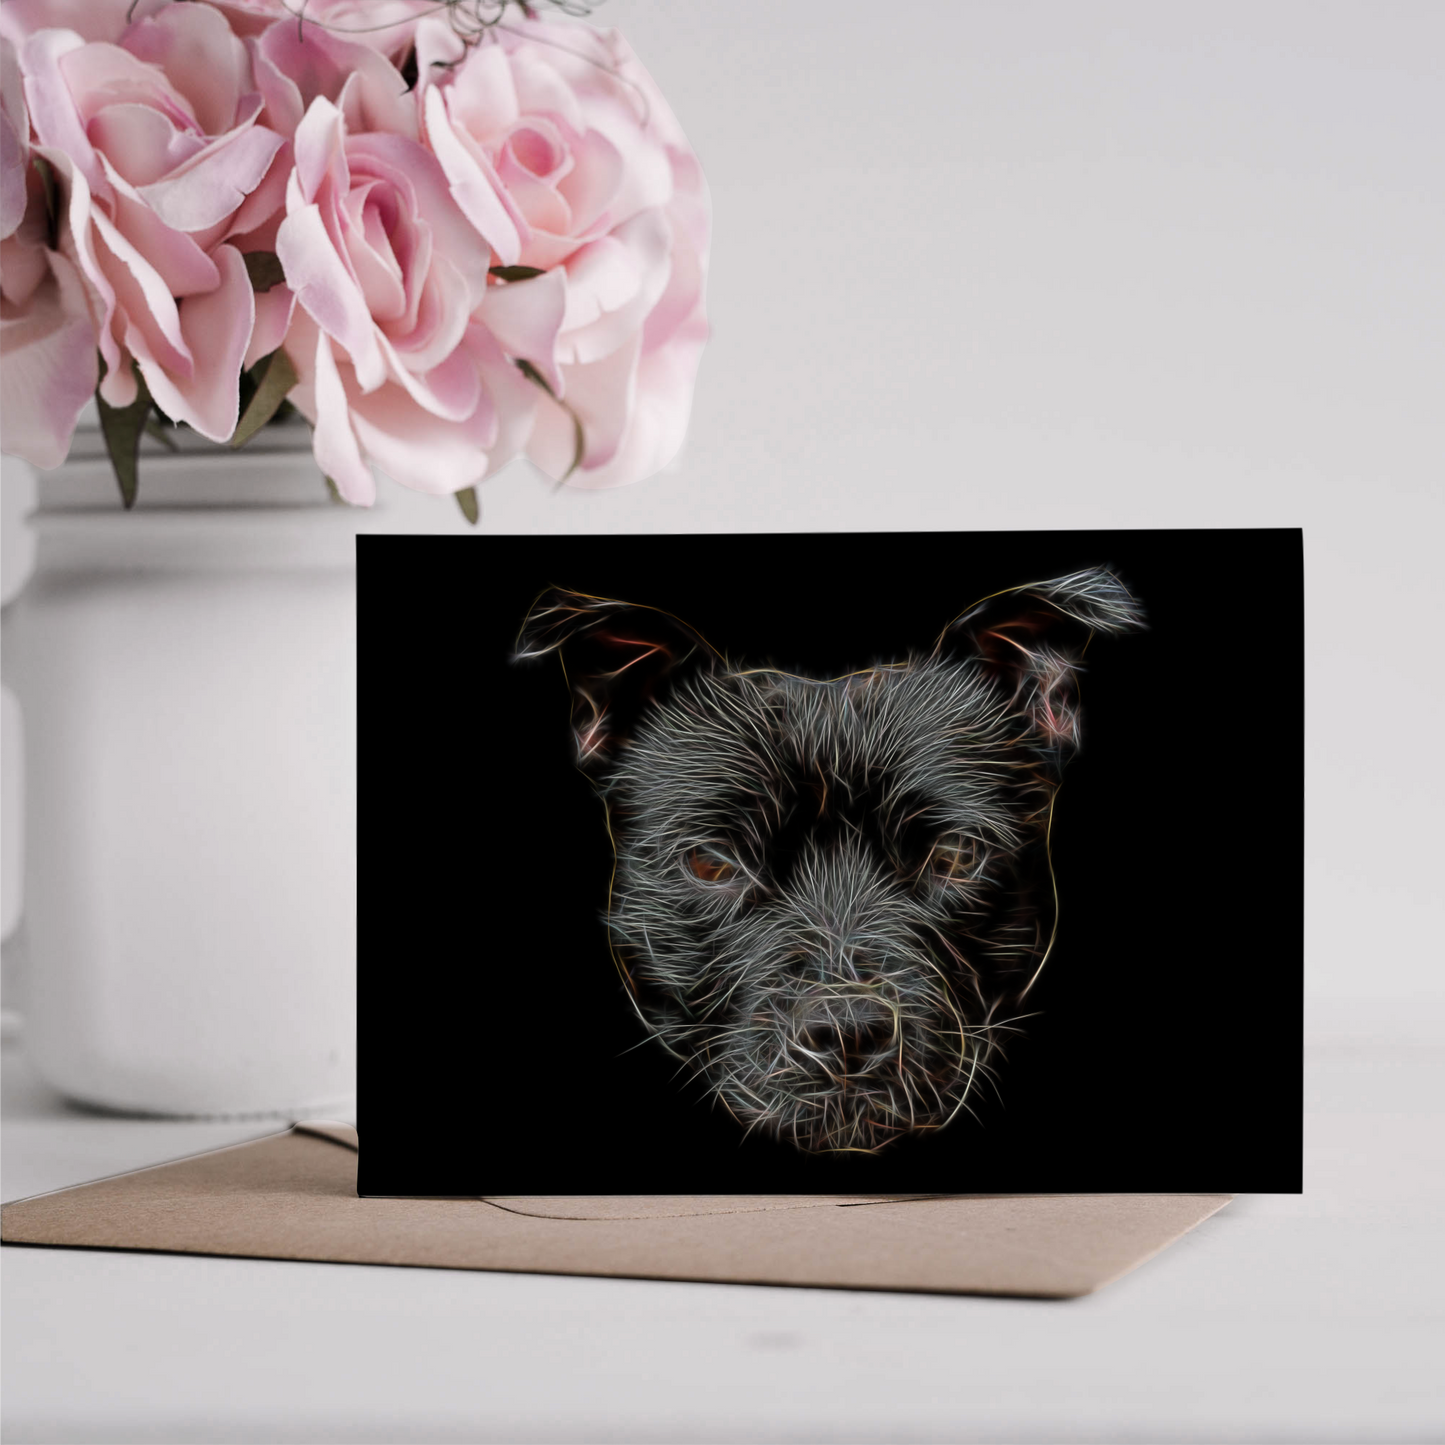 Black Staffordshire Bull Terrier Greeting Card Blank Inside for Birthdays or any other Occasion. Black Staffy Card